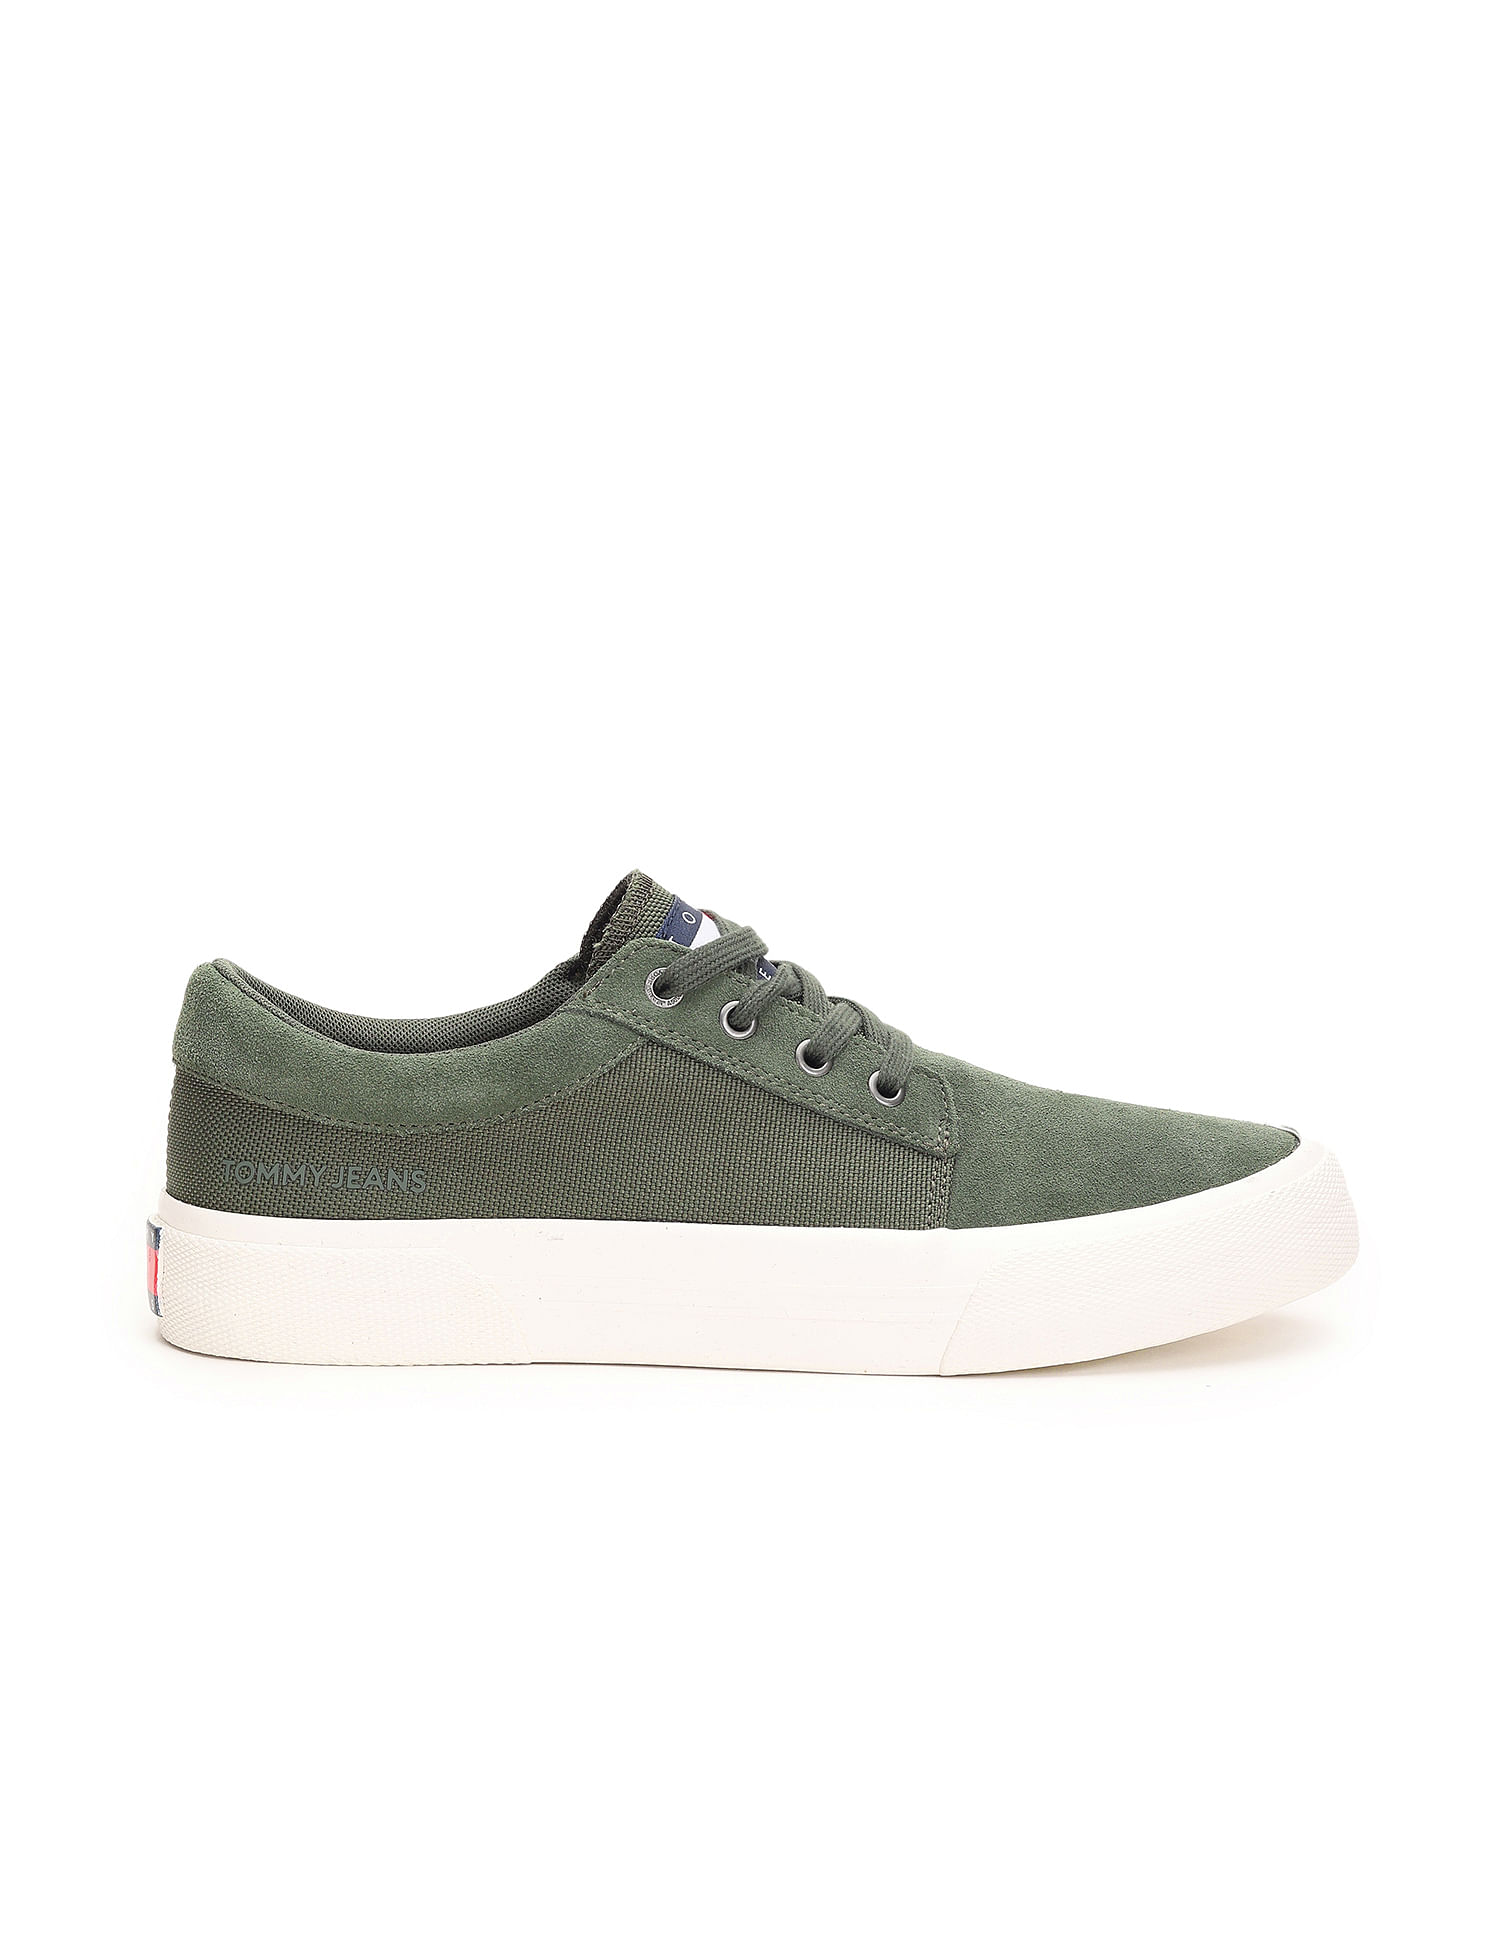 Buy Roadster Men Olive Green Sneakers - Casual Shoes for Men 8044763 |  Myntra